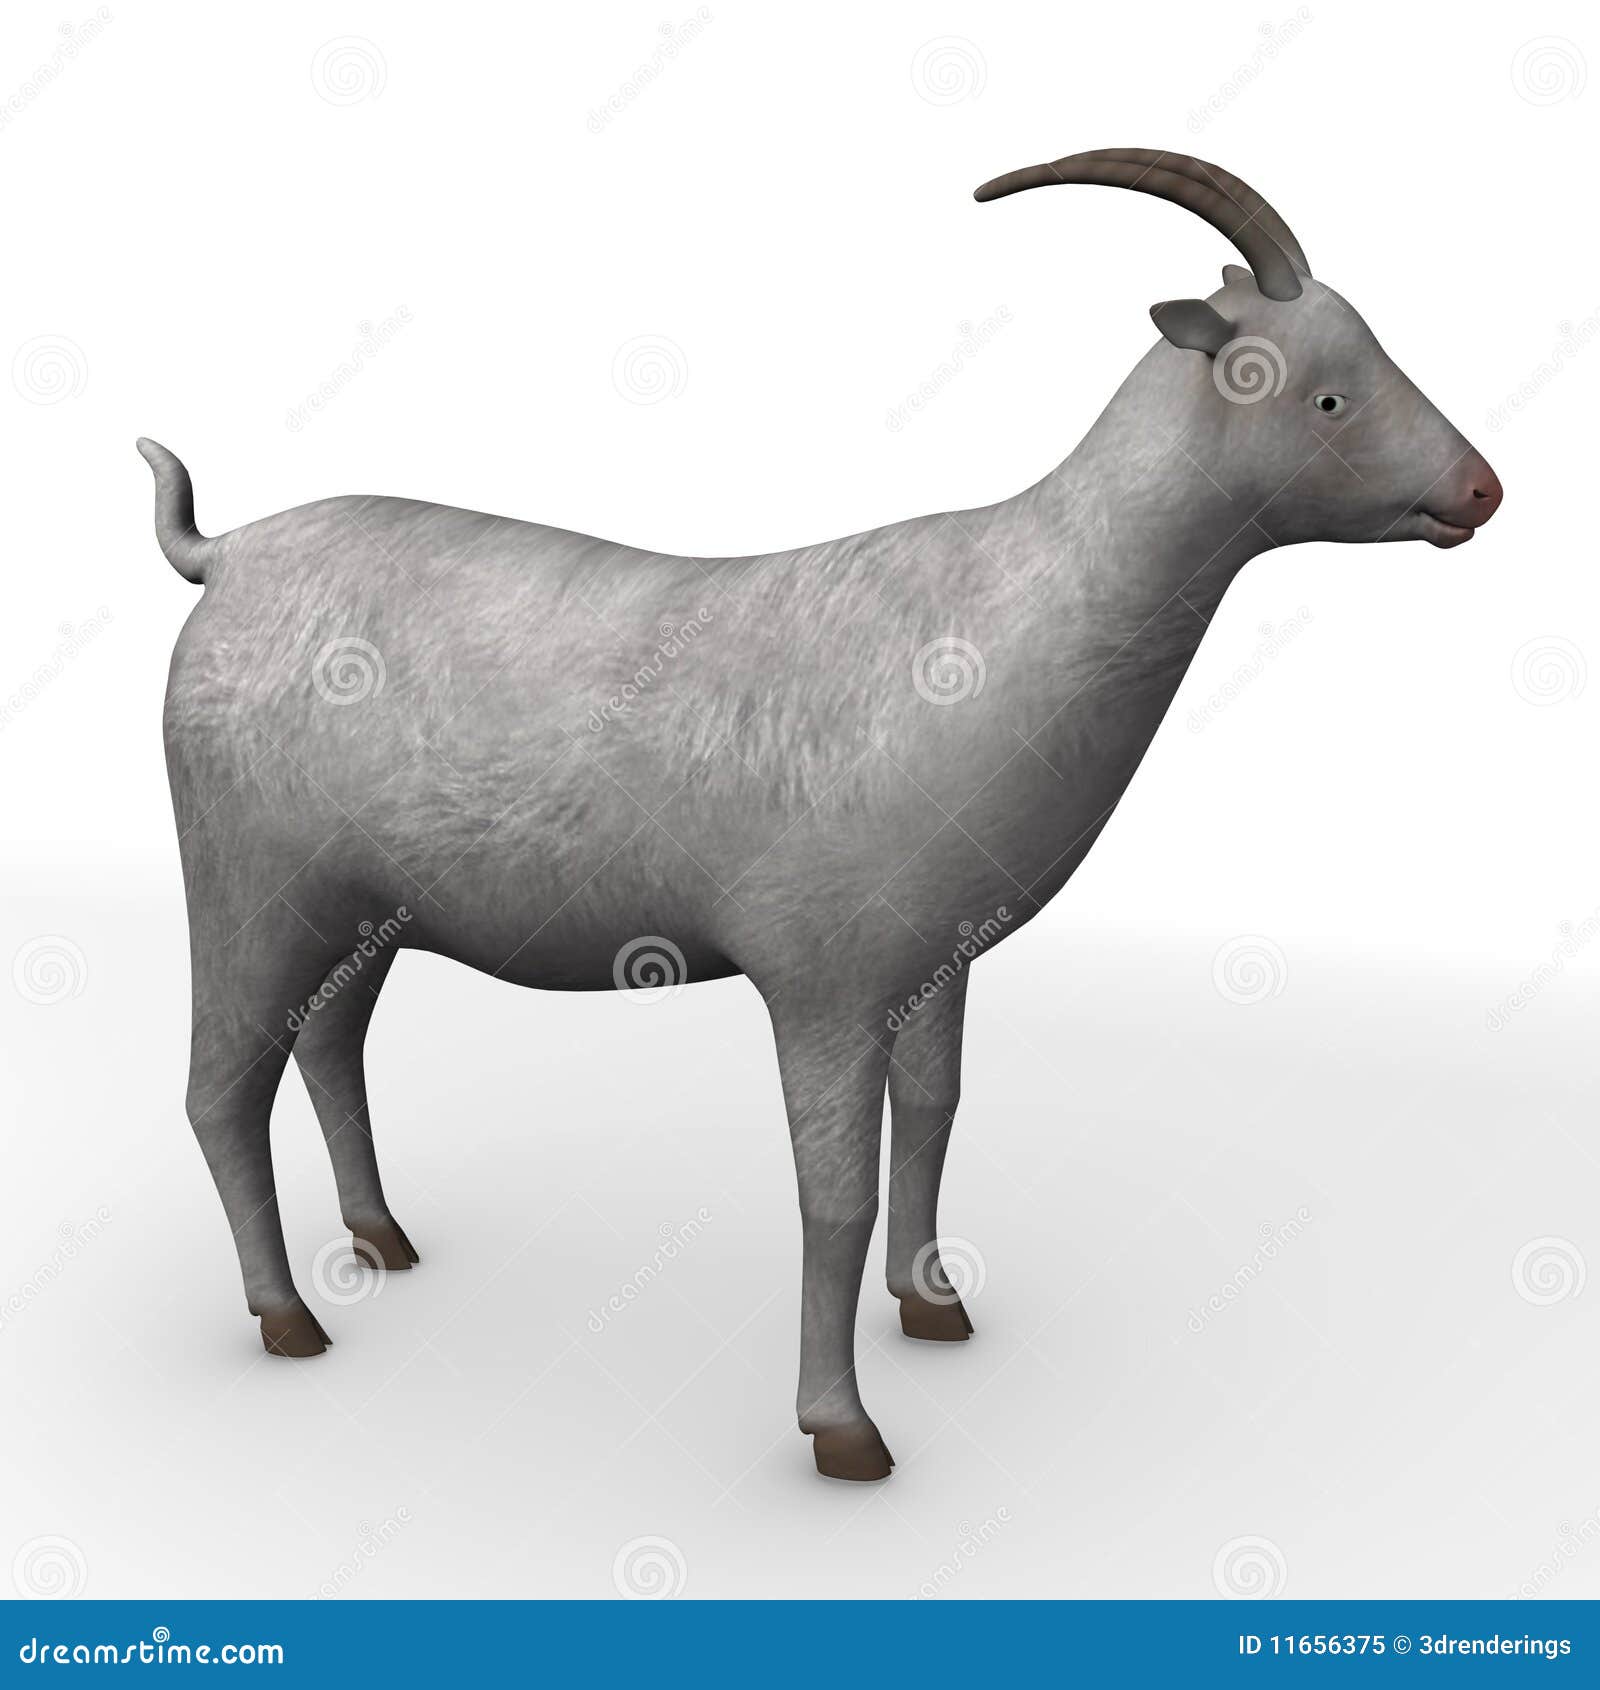 32,600 Old Goat Images, Stock Photos, 3D objects, & Vectors